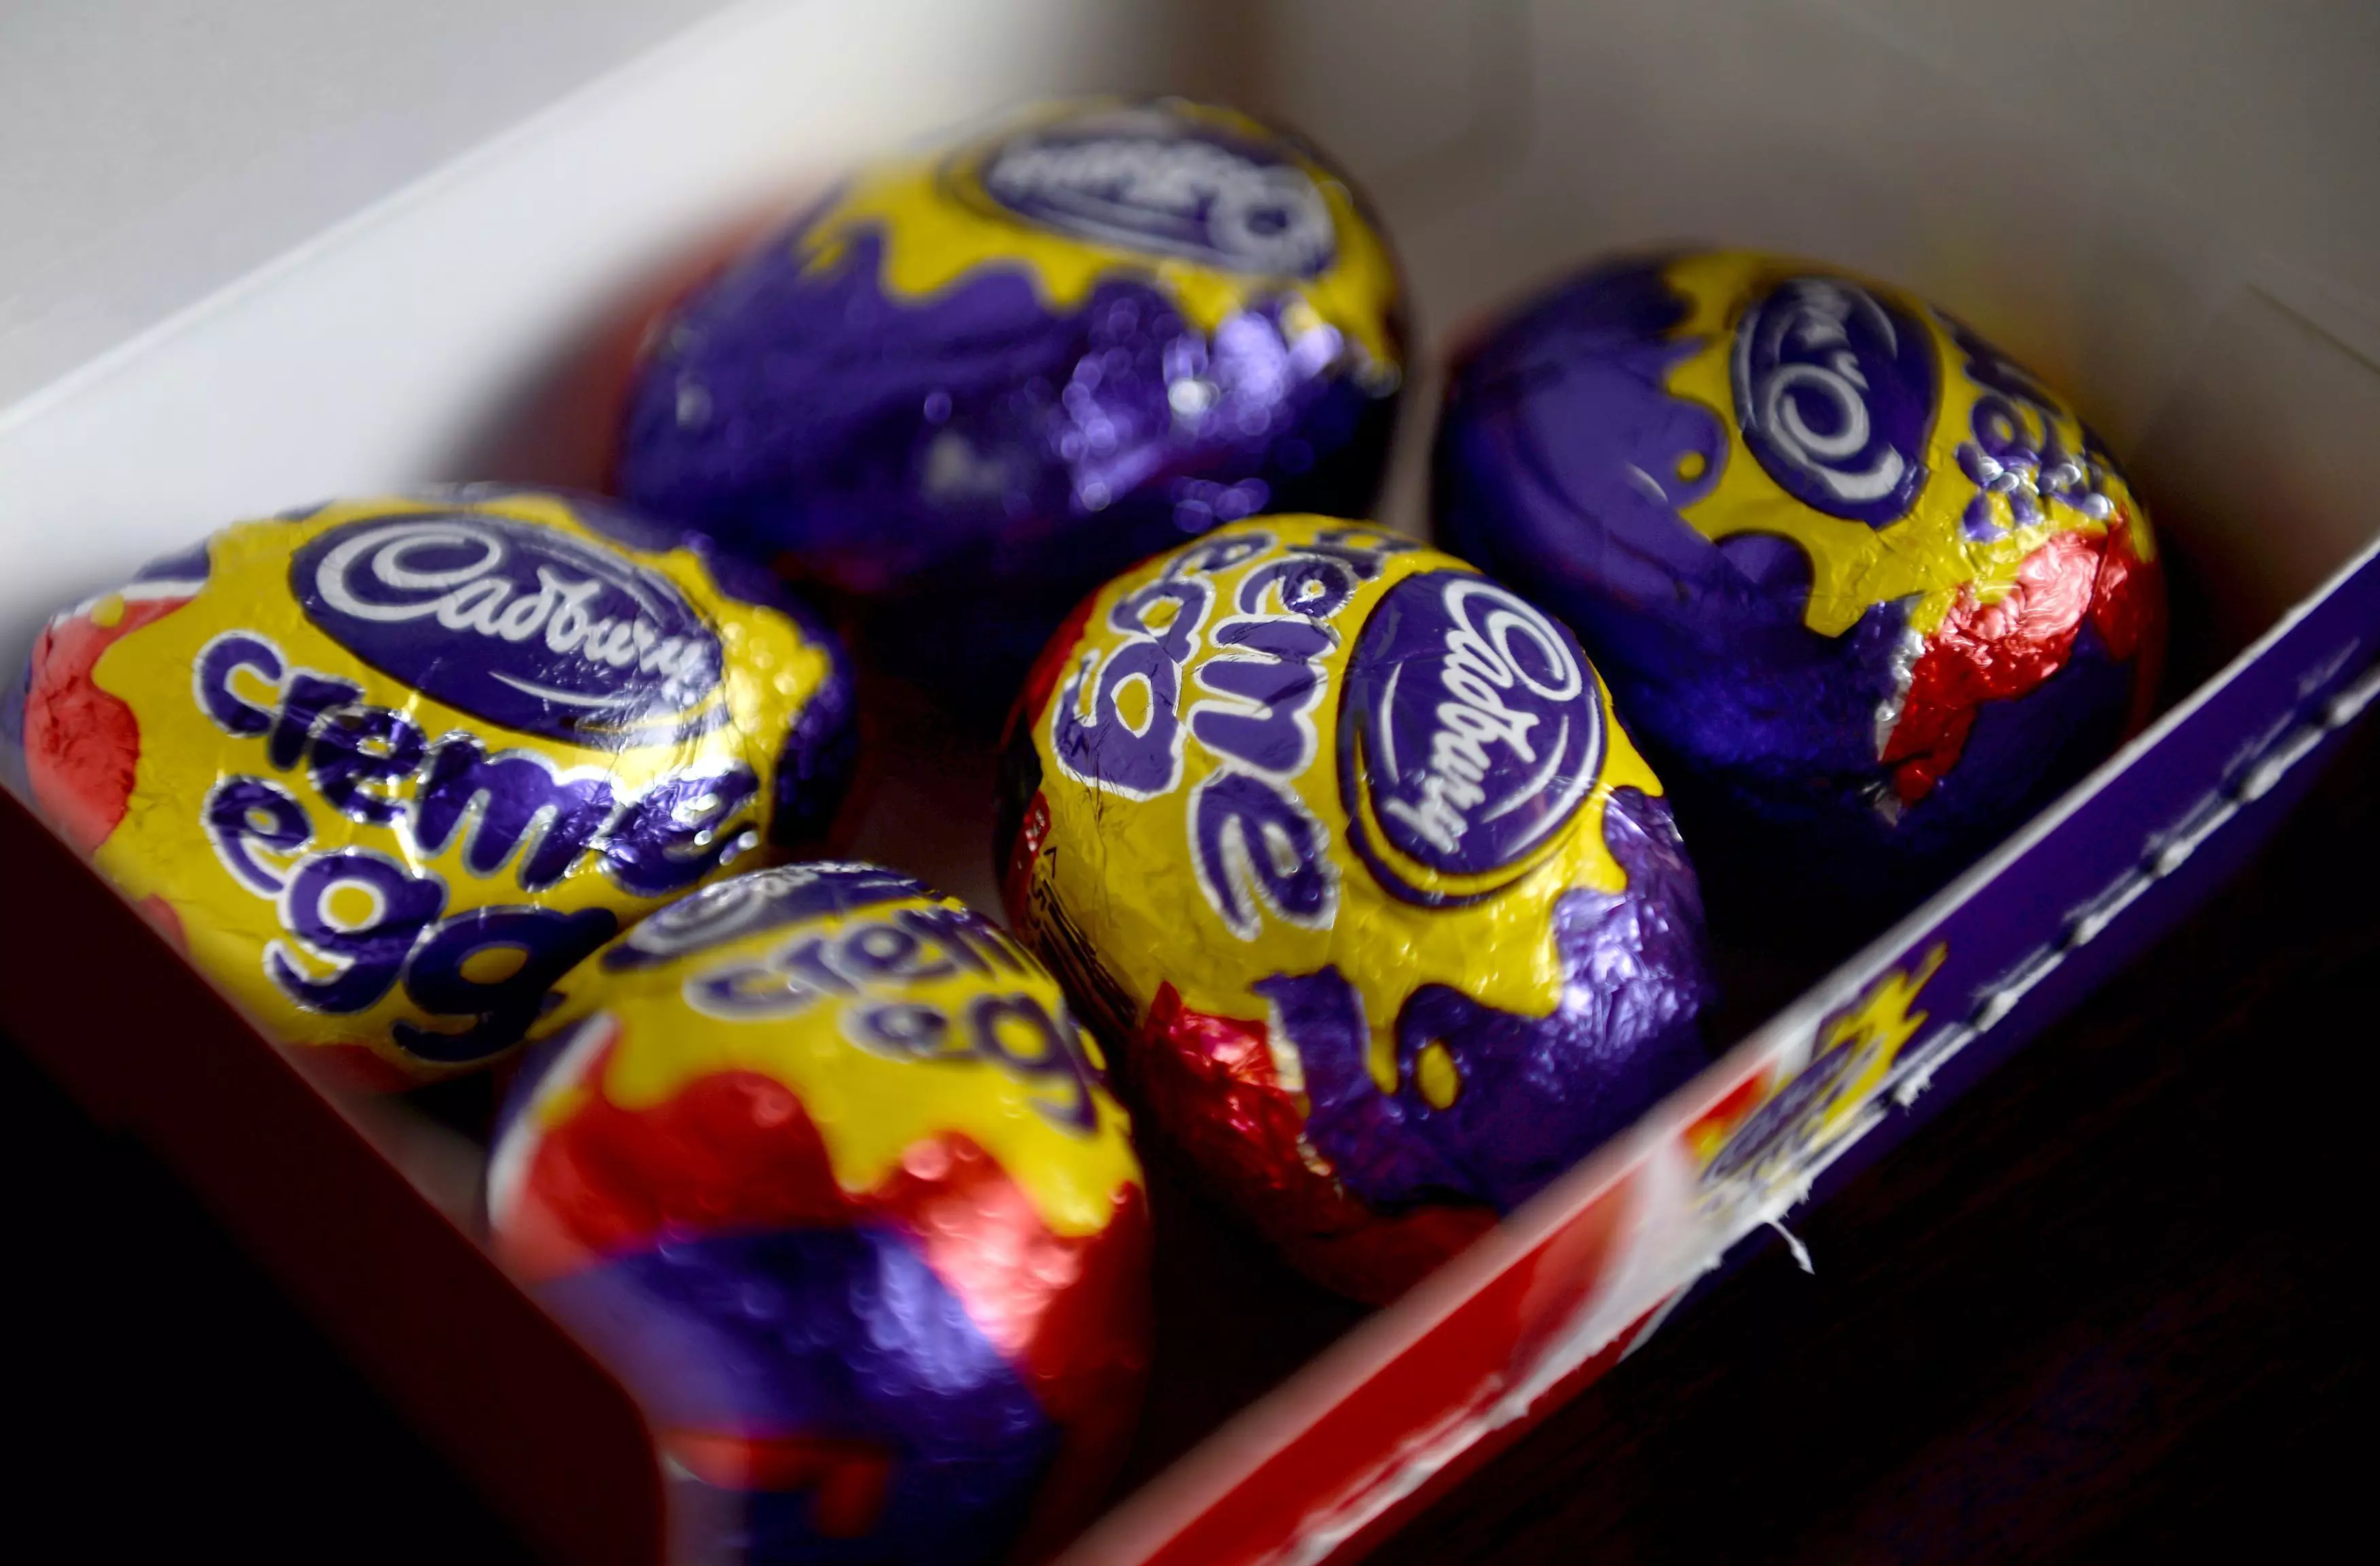 Creme Eggs have made an early return this year (